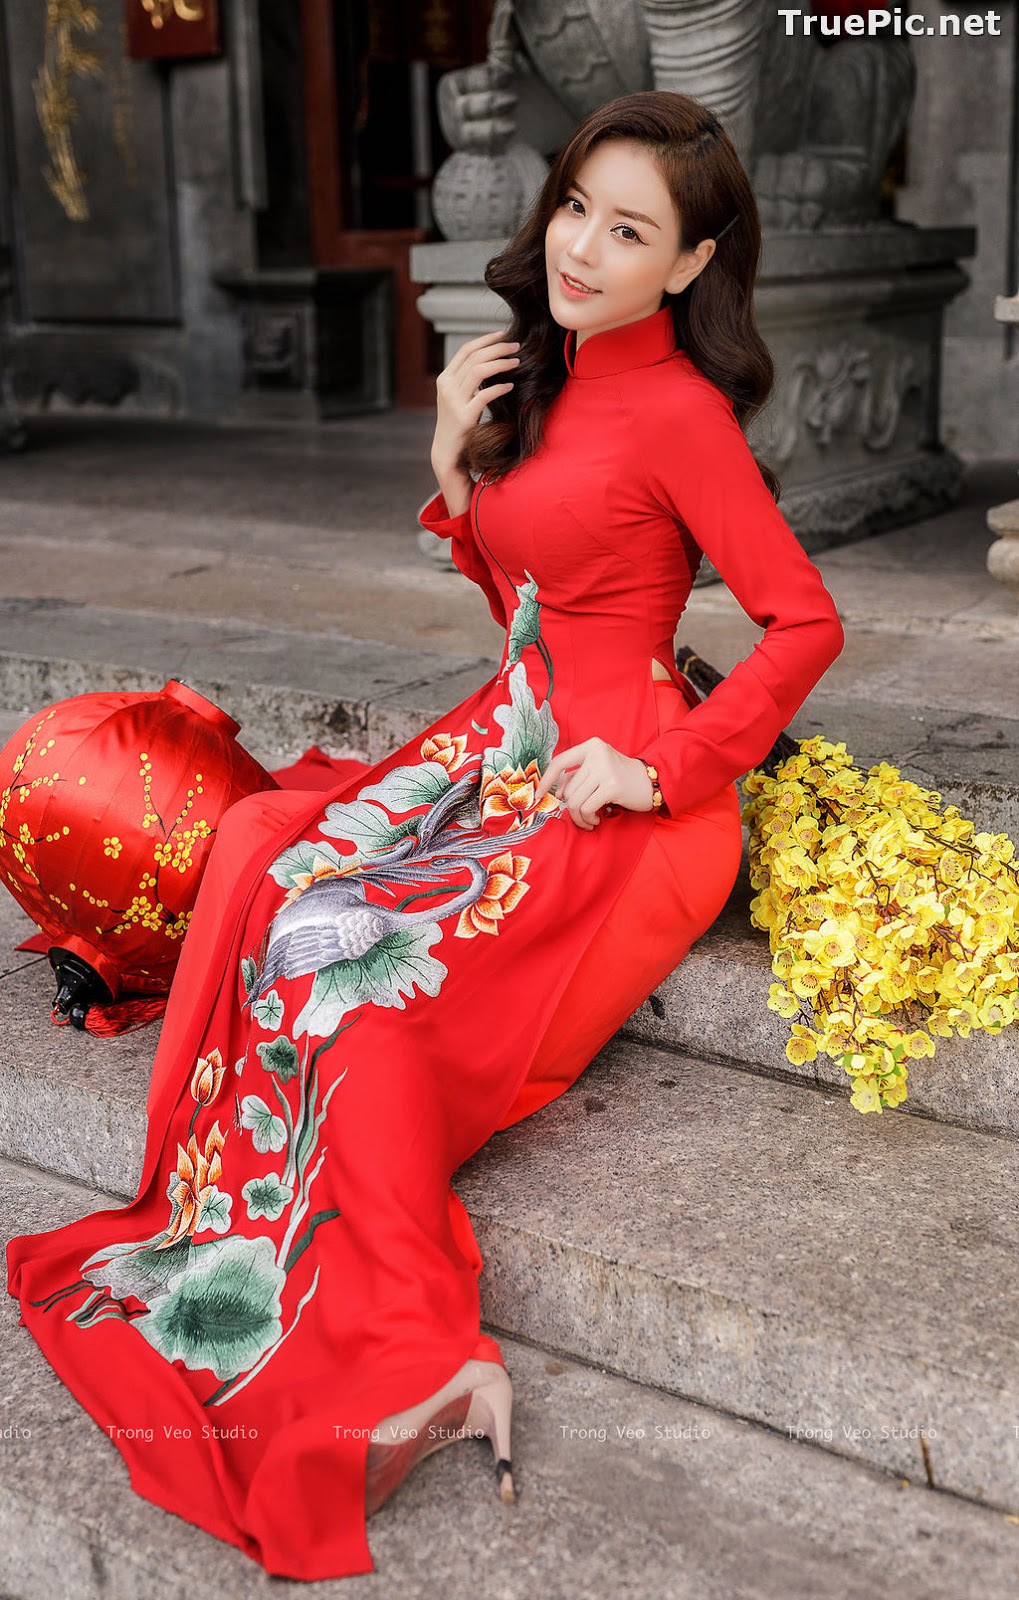 Image The Beauty of Vietnamese Girls with Traditional Dress (Ao Dai) #4 - TruePic.net - Picture-27